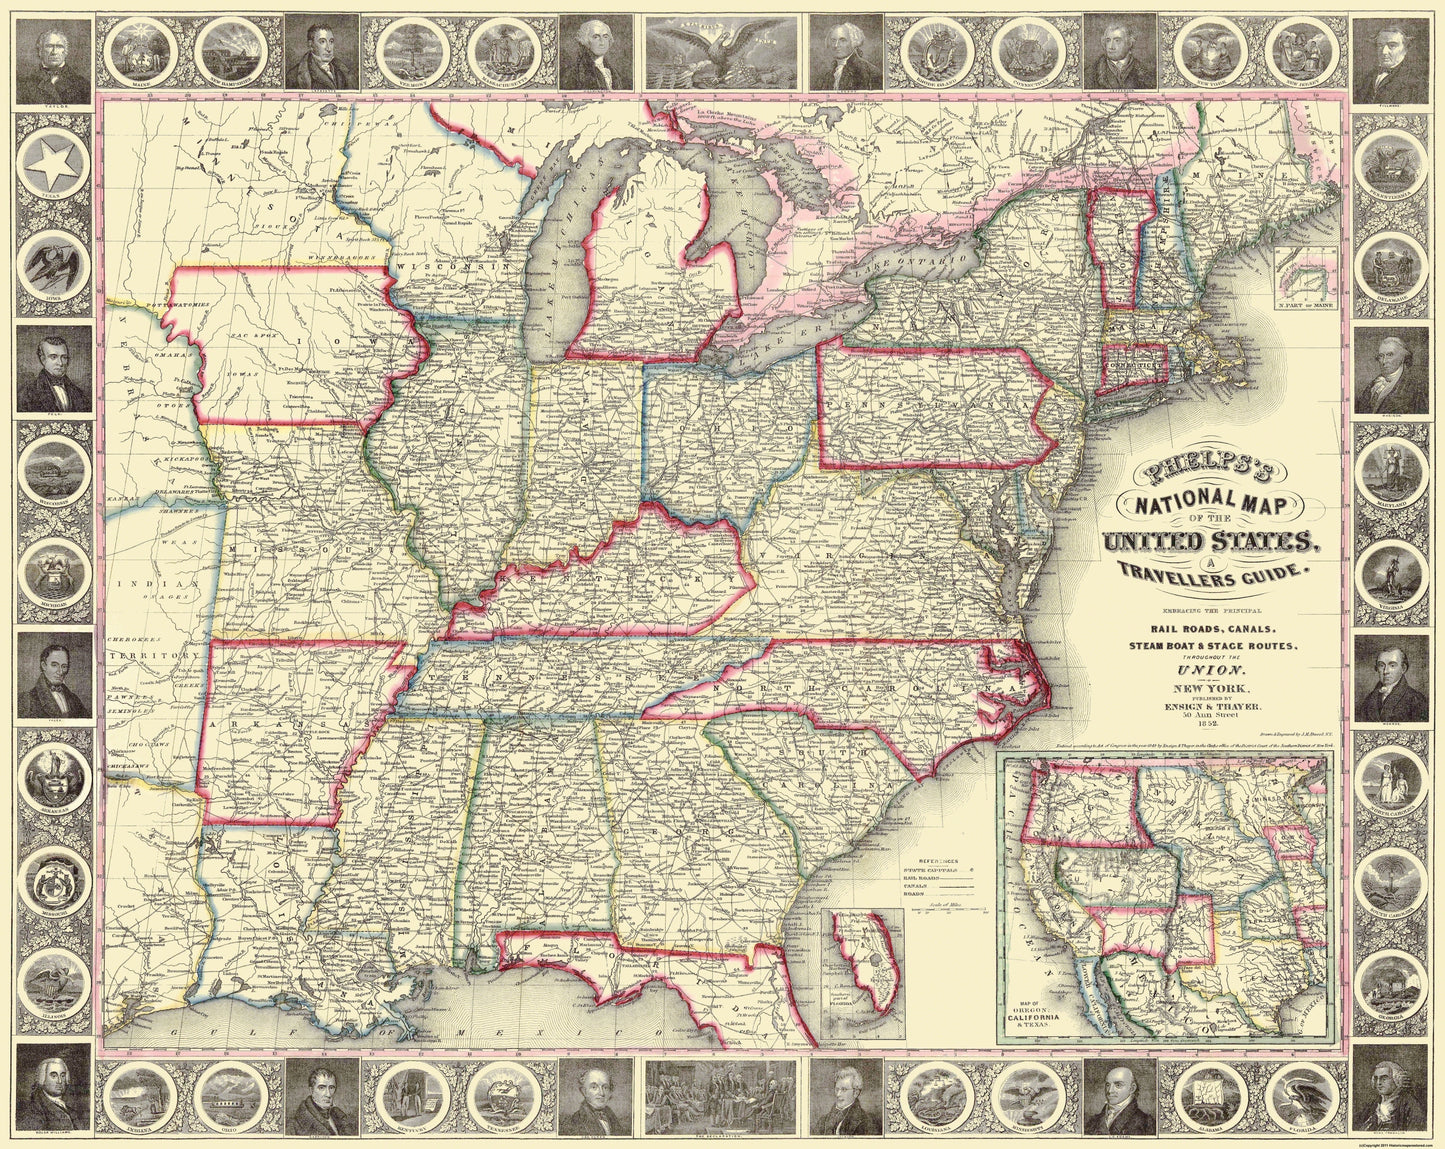 Historic State Map - United States Travellers Guide - Phelps 1852 - 28.94 x 23 - Vintage Wall Art